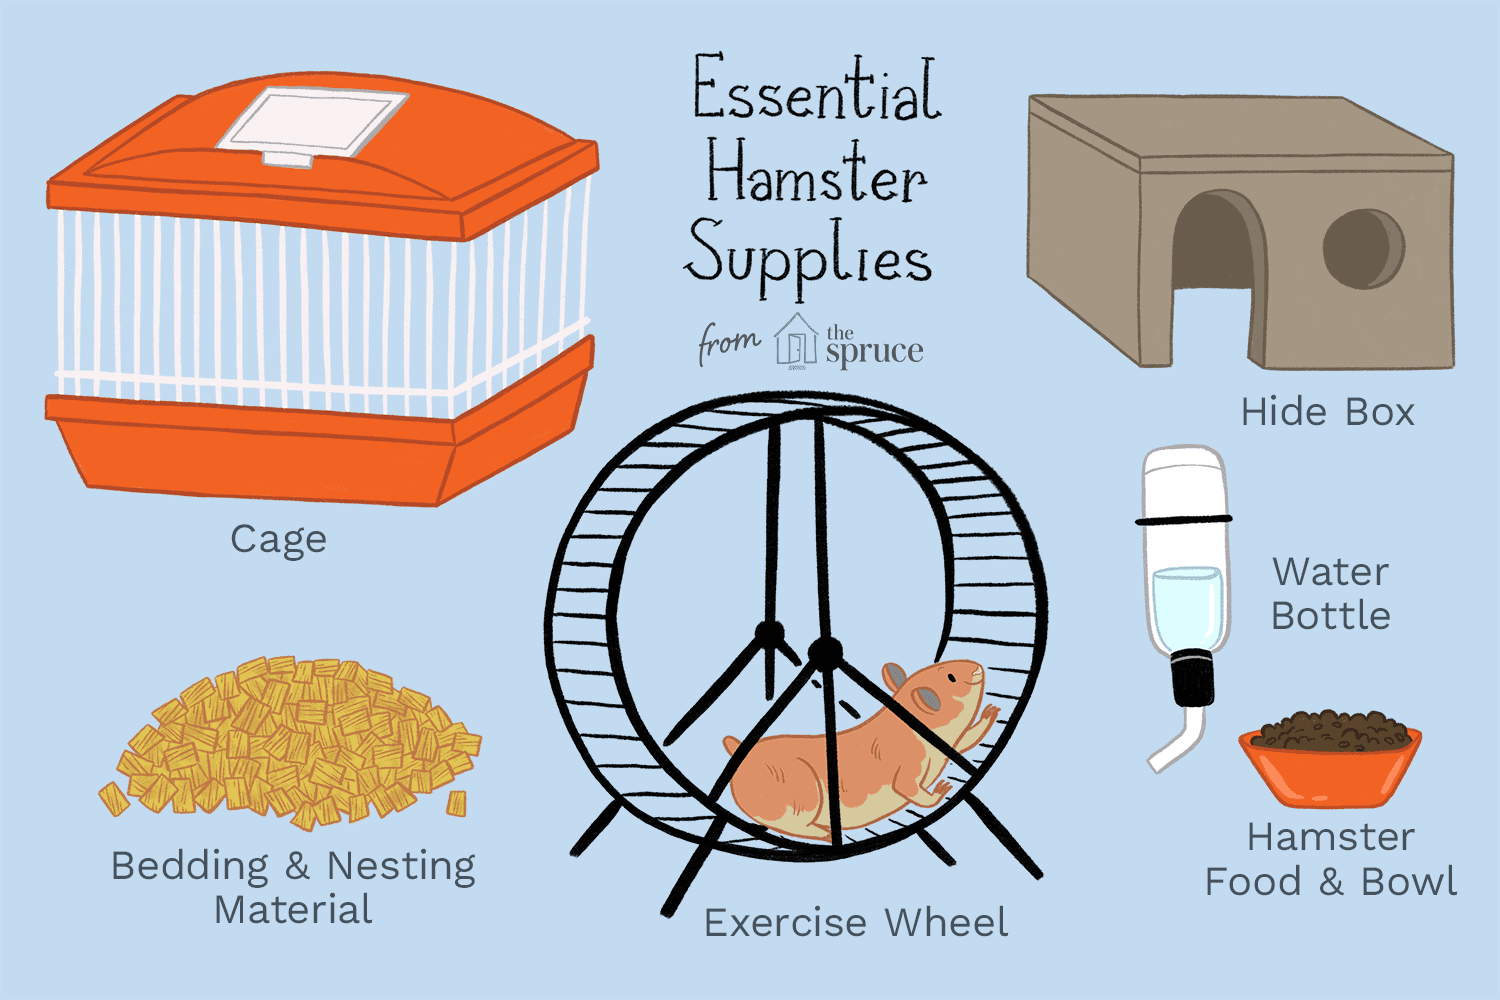 What kind of cage is needed for a hamster?